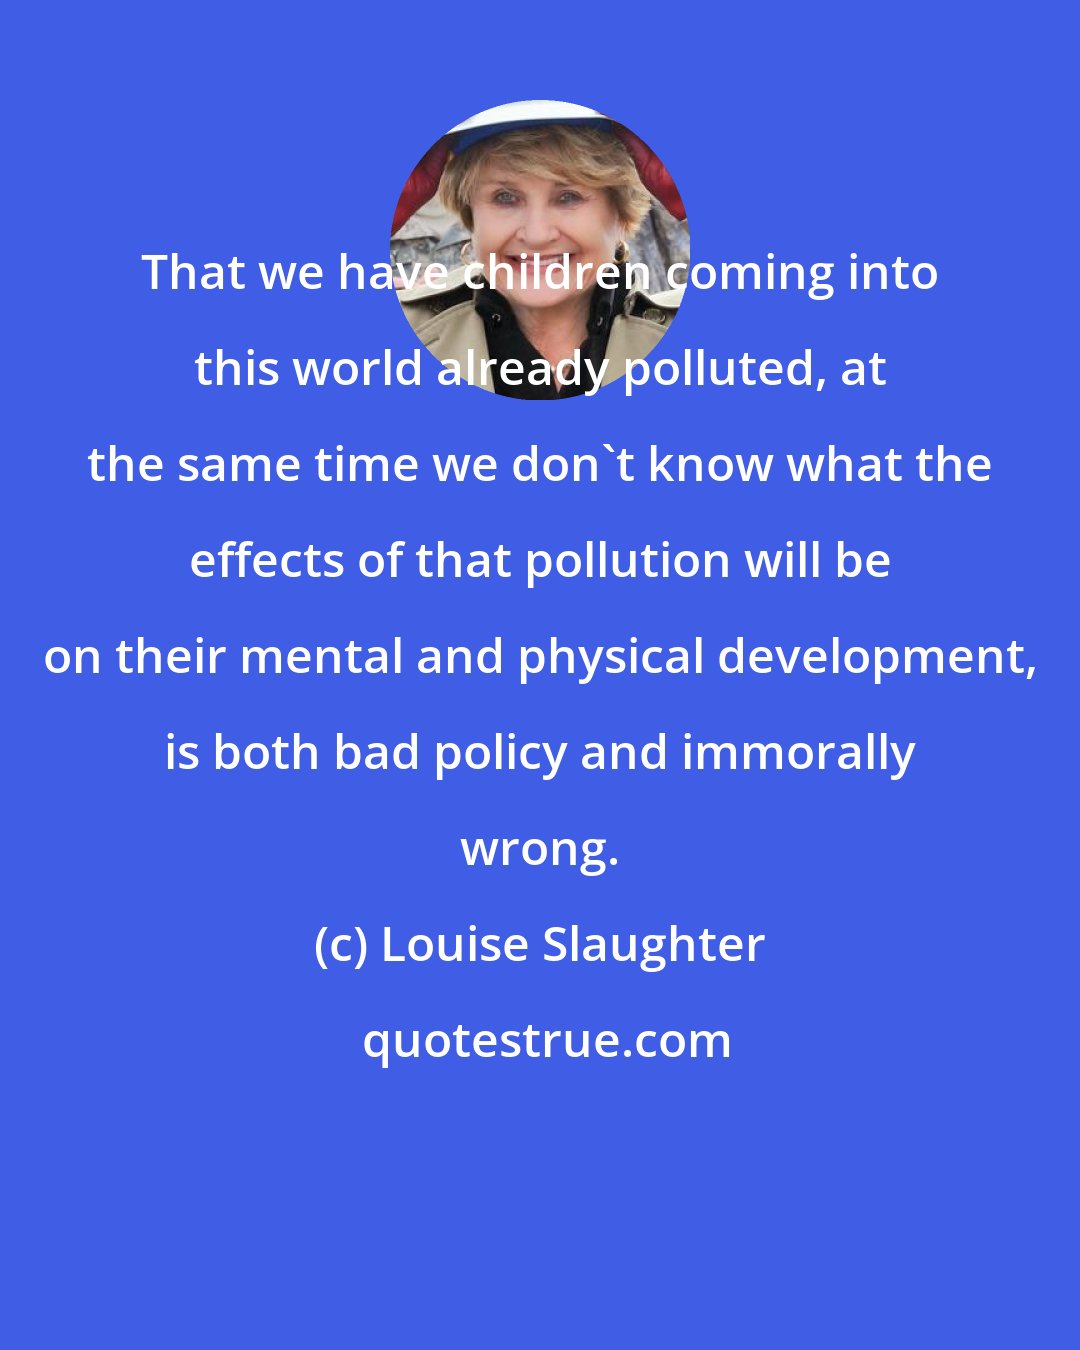 Louise Slaughter: That we have children coming into this world already polluted, at the same time we don't know what the effects of that pollution will be on their mental and physical development, is both bad policy and immorally wrong.